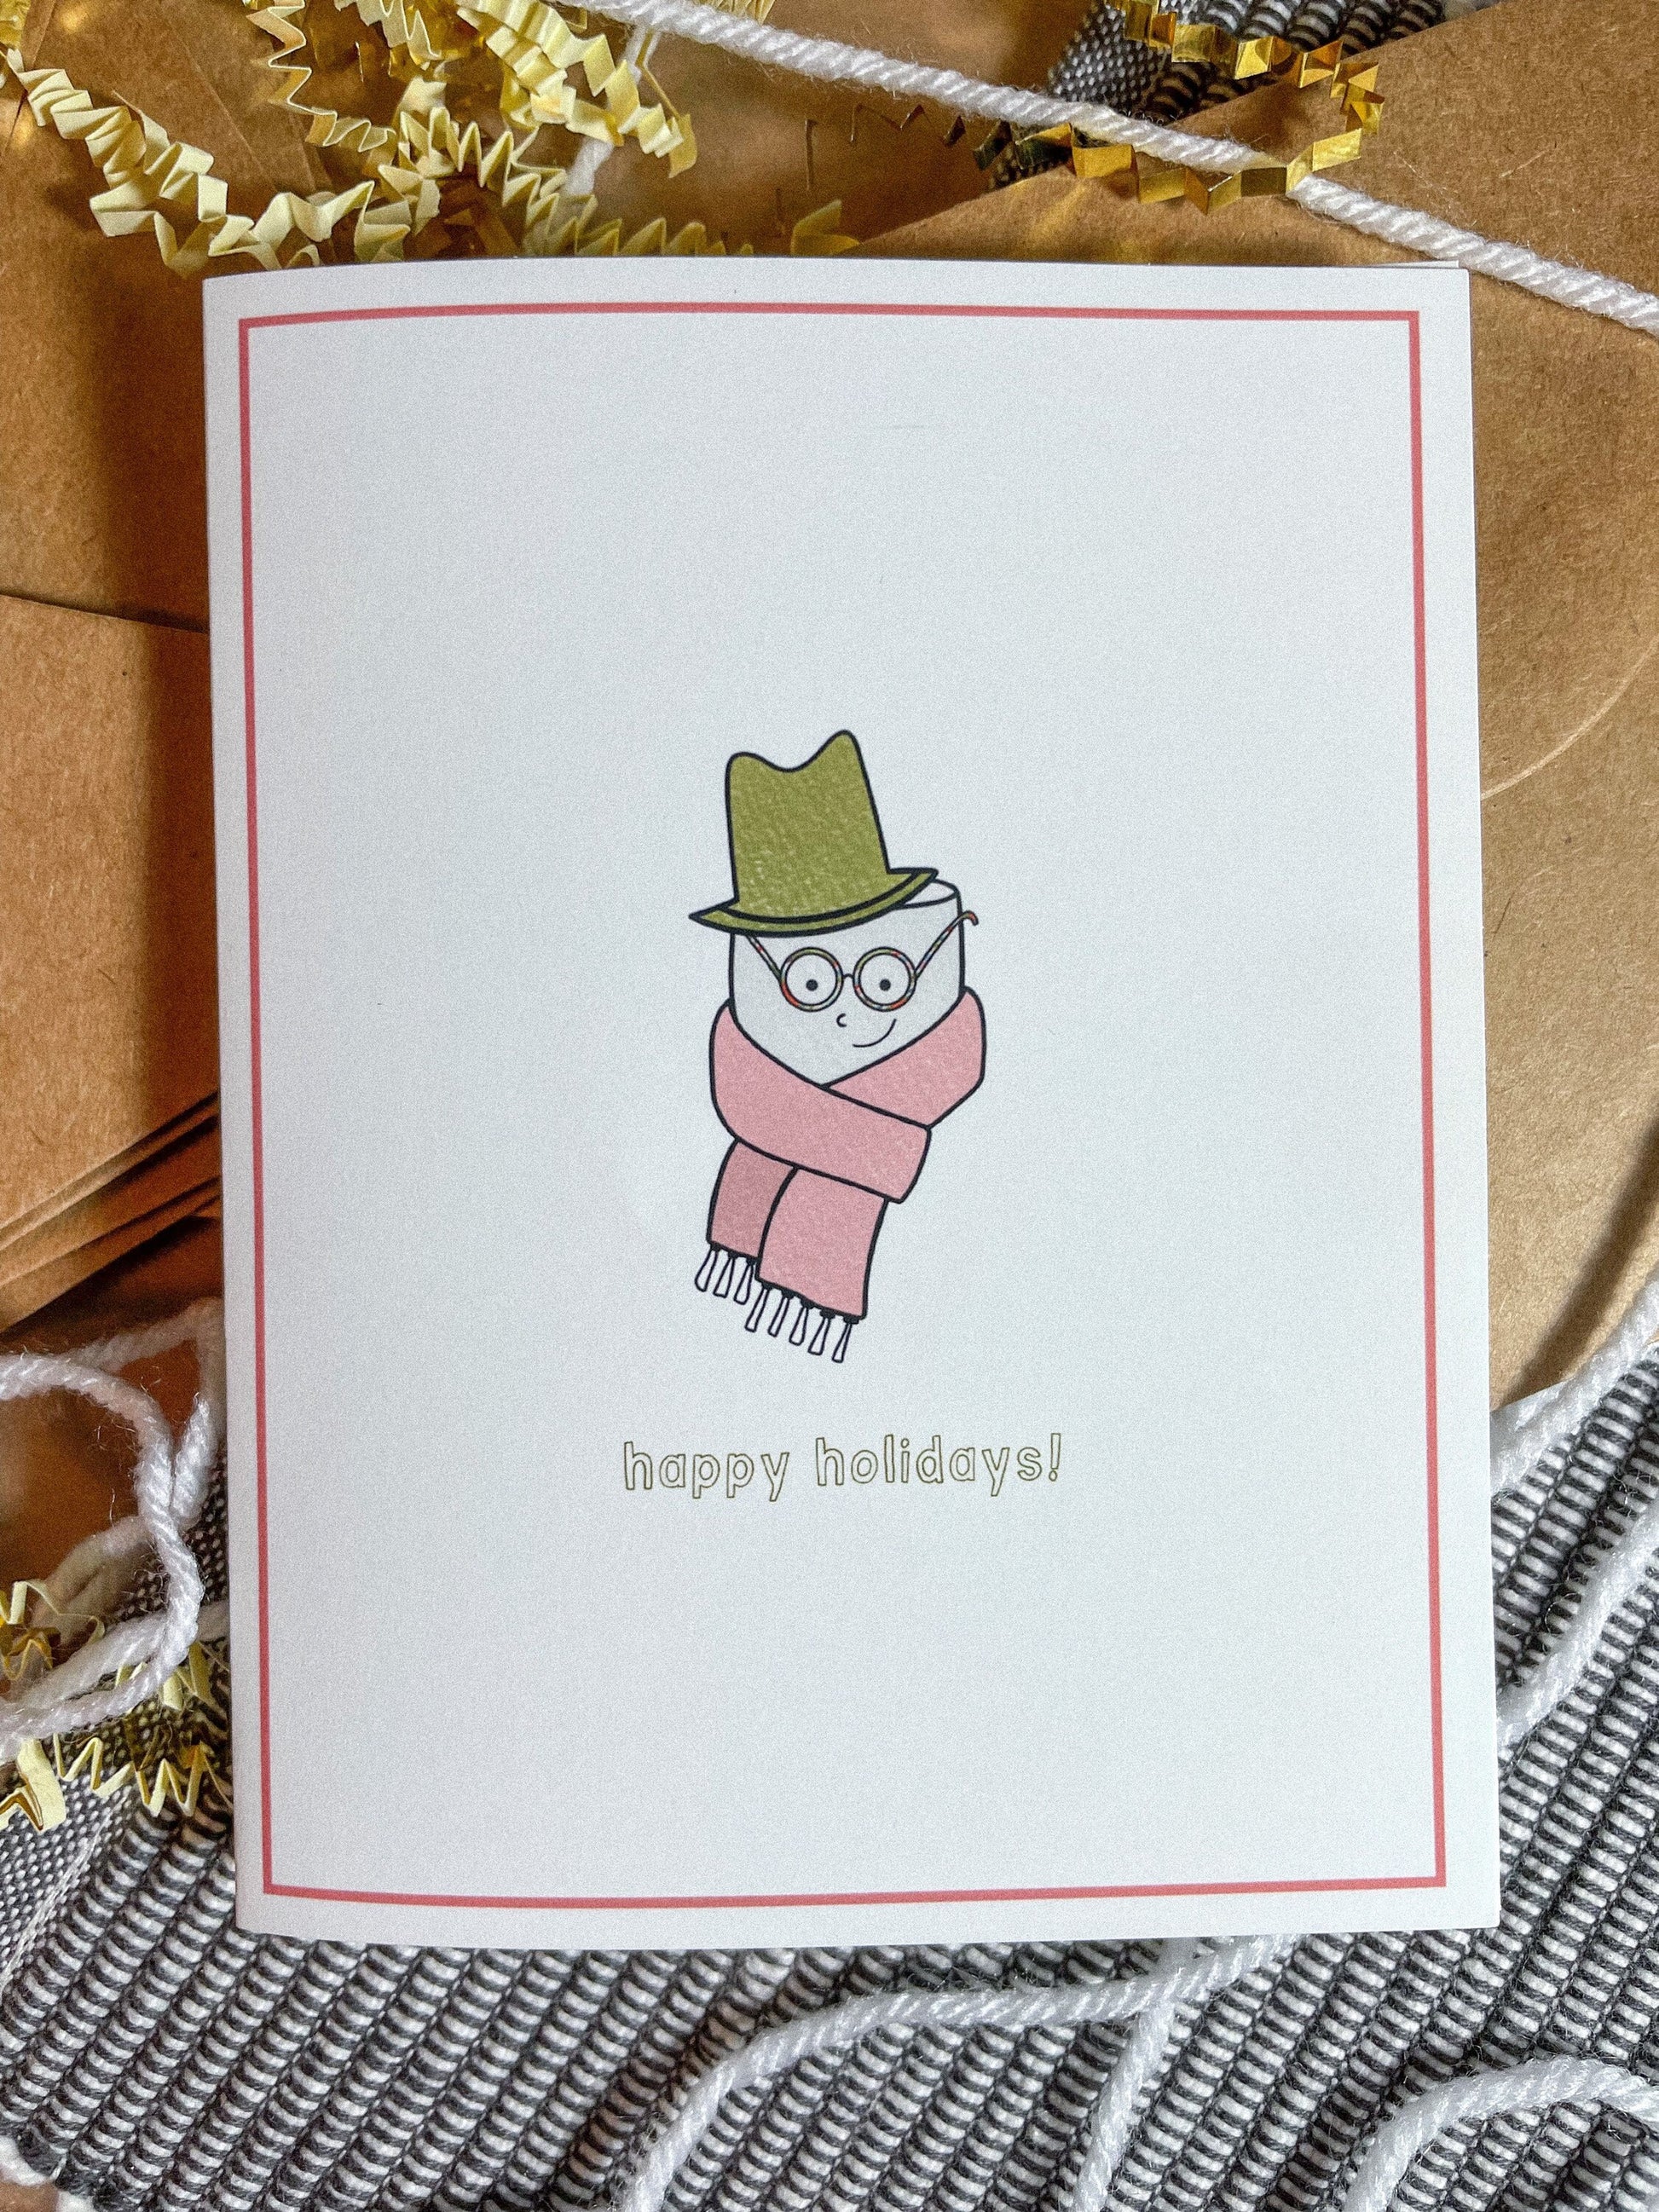 This holiday card features a drawing of a cute little marshmallow man with a scarf and a top hat with the text 'happy holidays!"